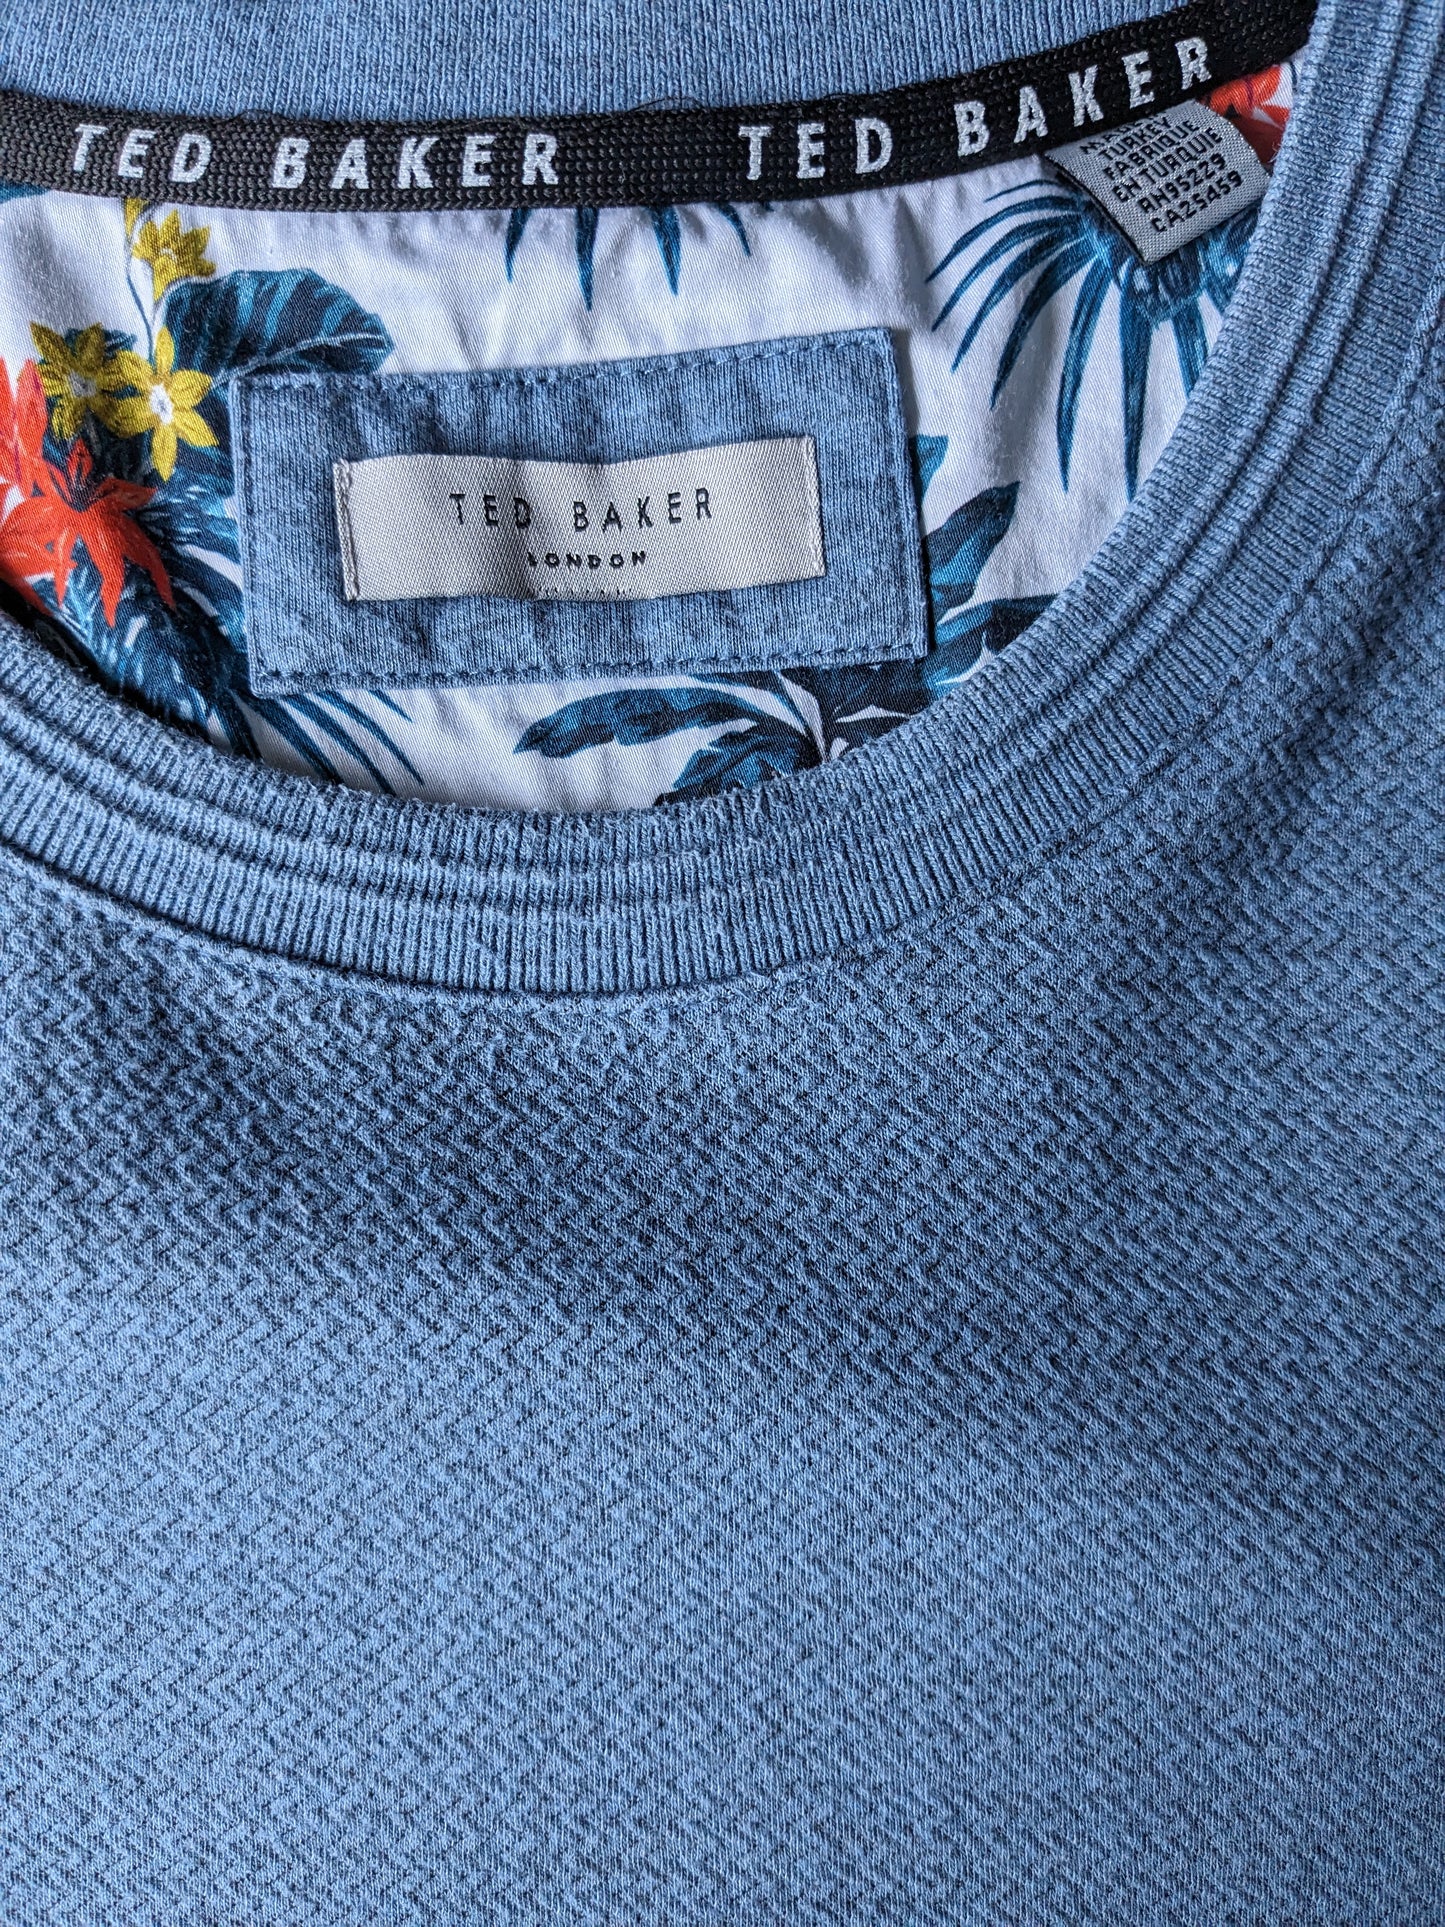 Pull occasionnel Ted Baker. Motif à chevrons bleu. Taille xl.